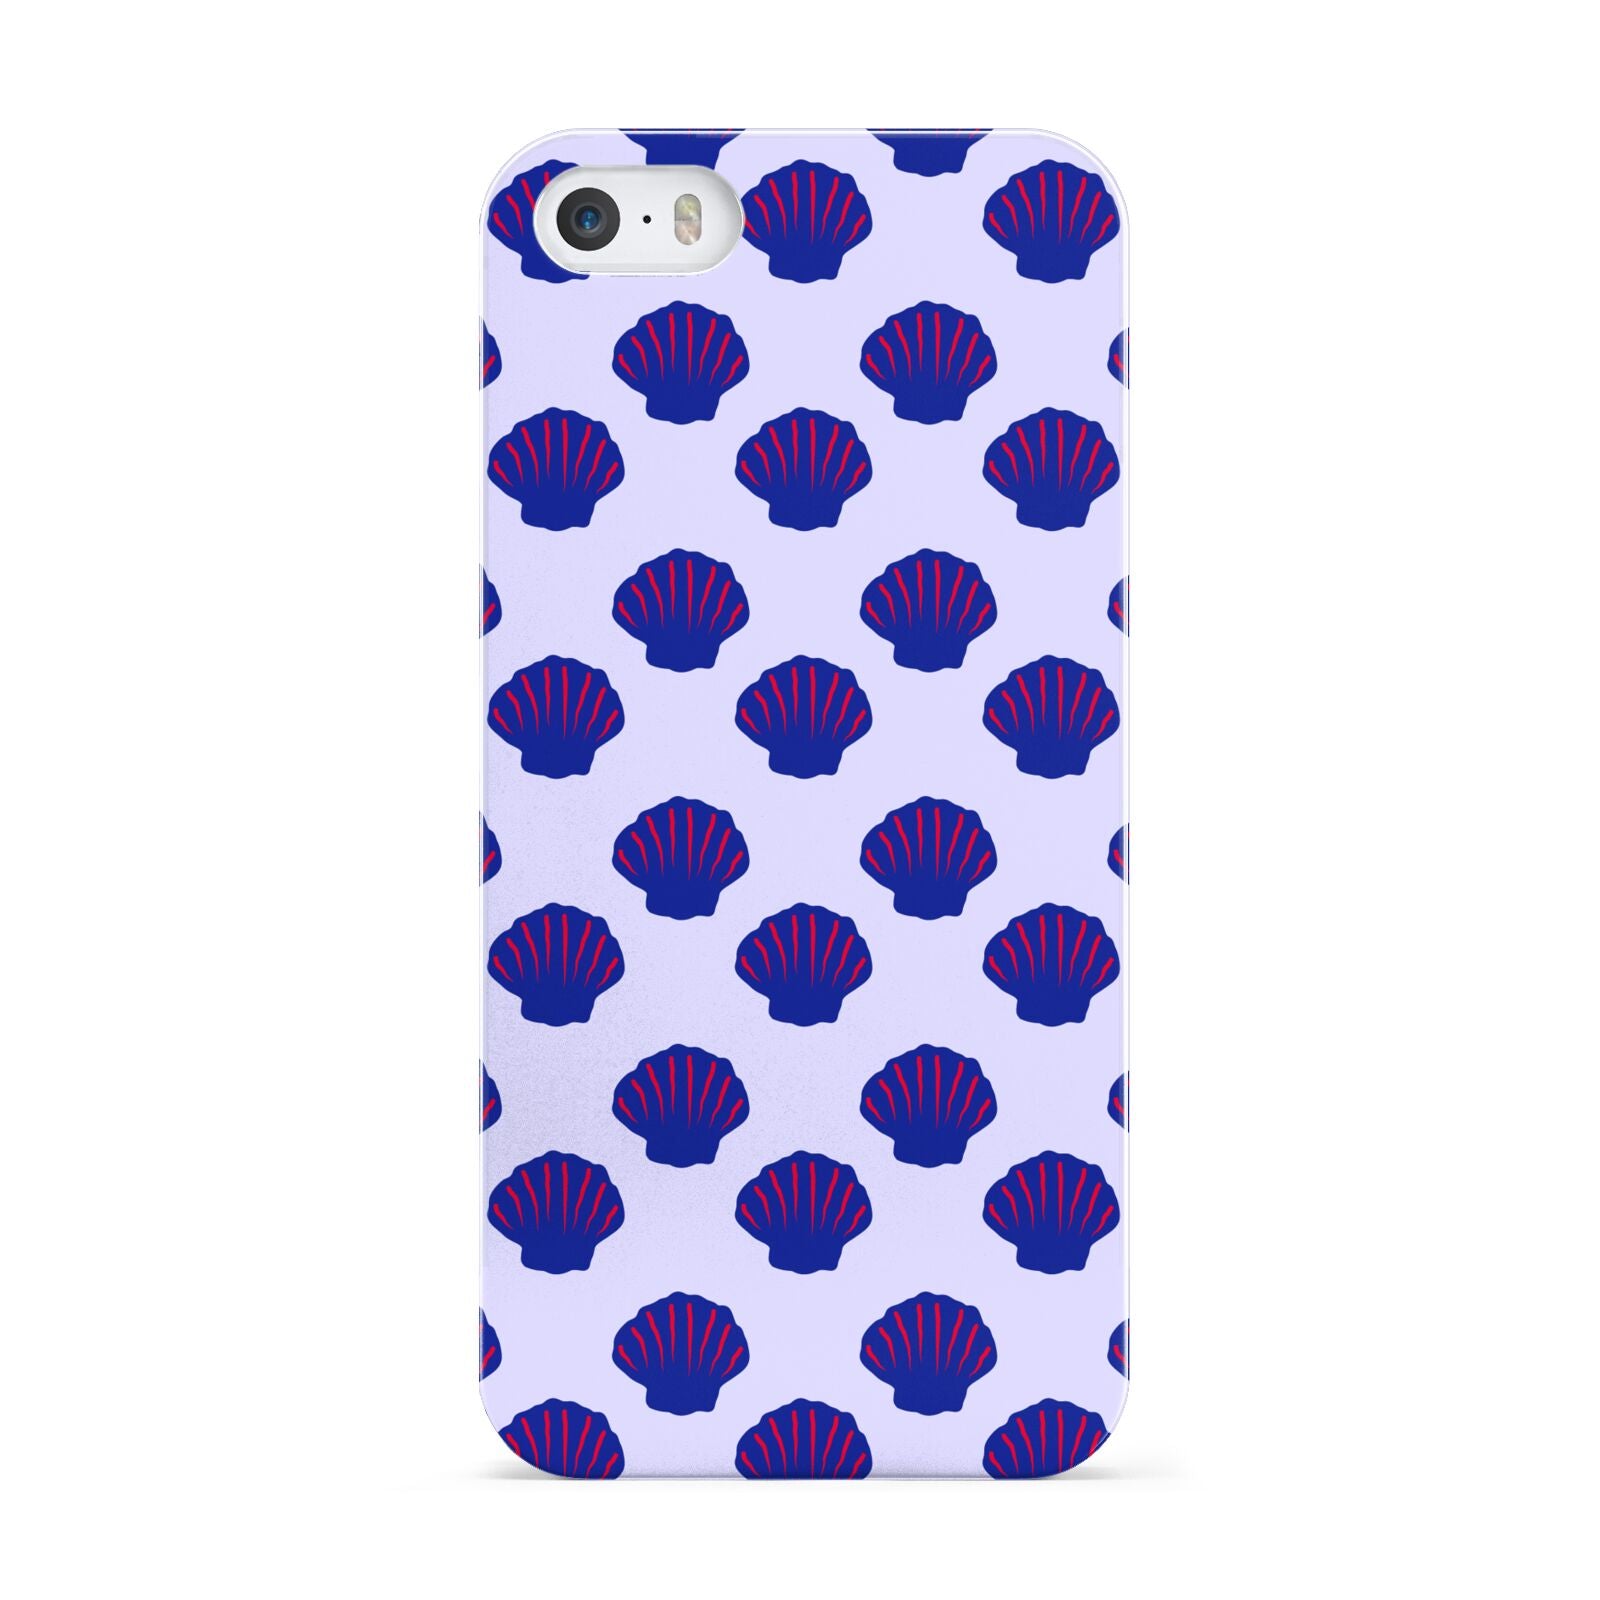 Shell Pattern Apple iPhone 5 Case